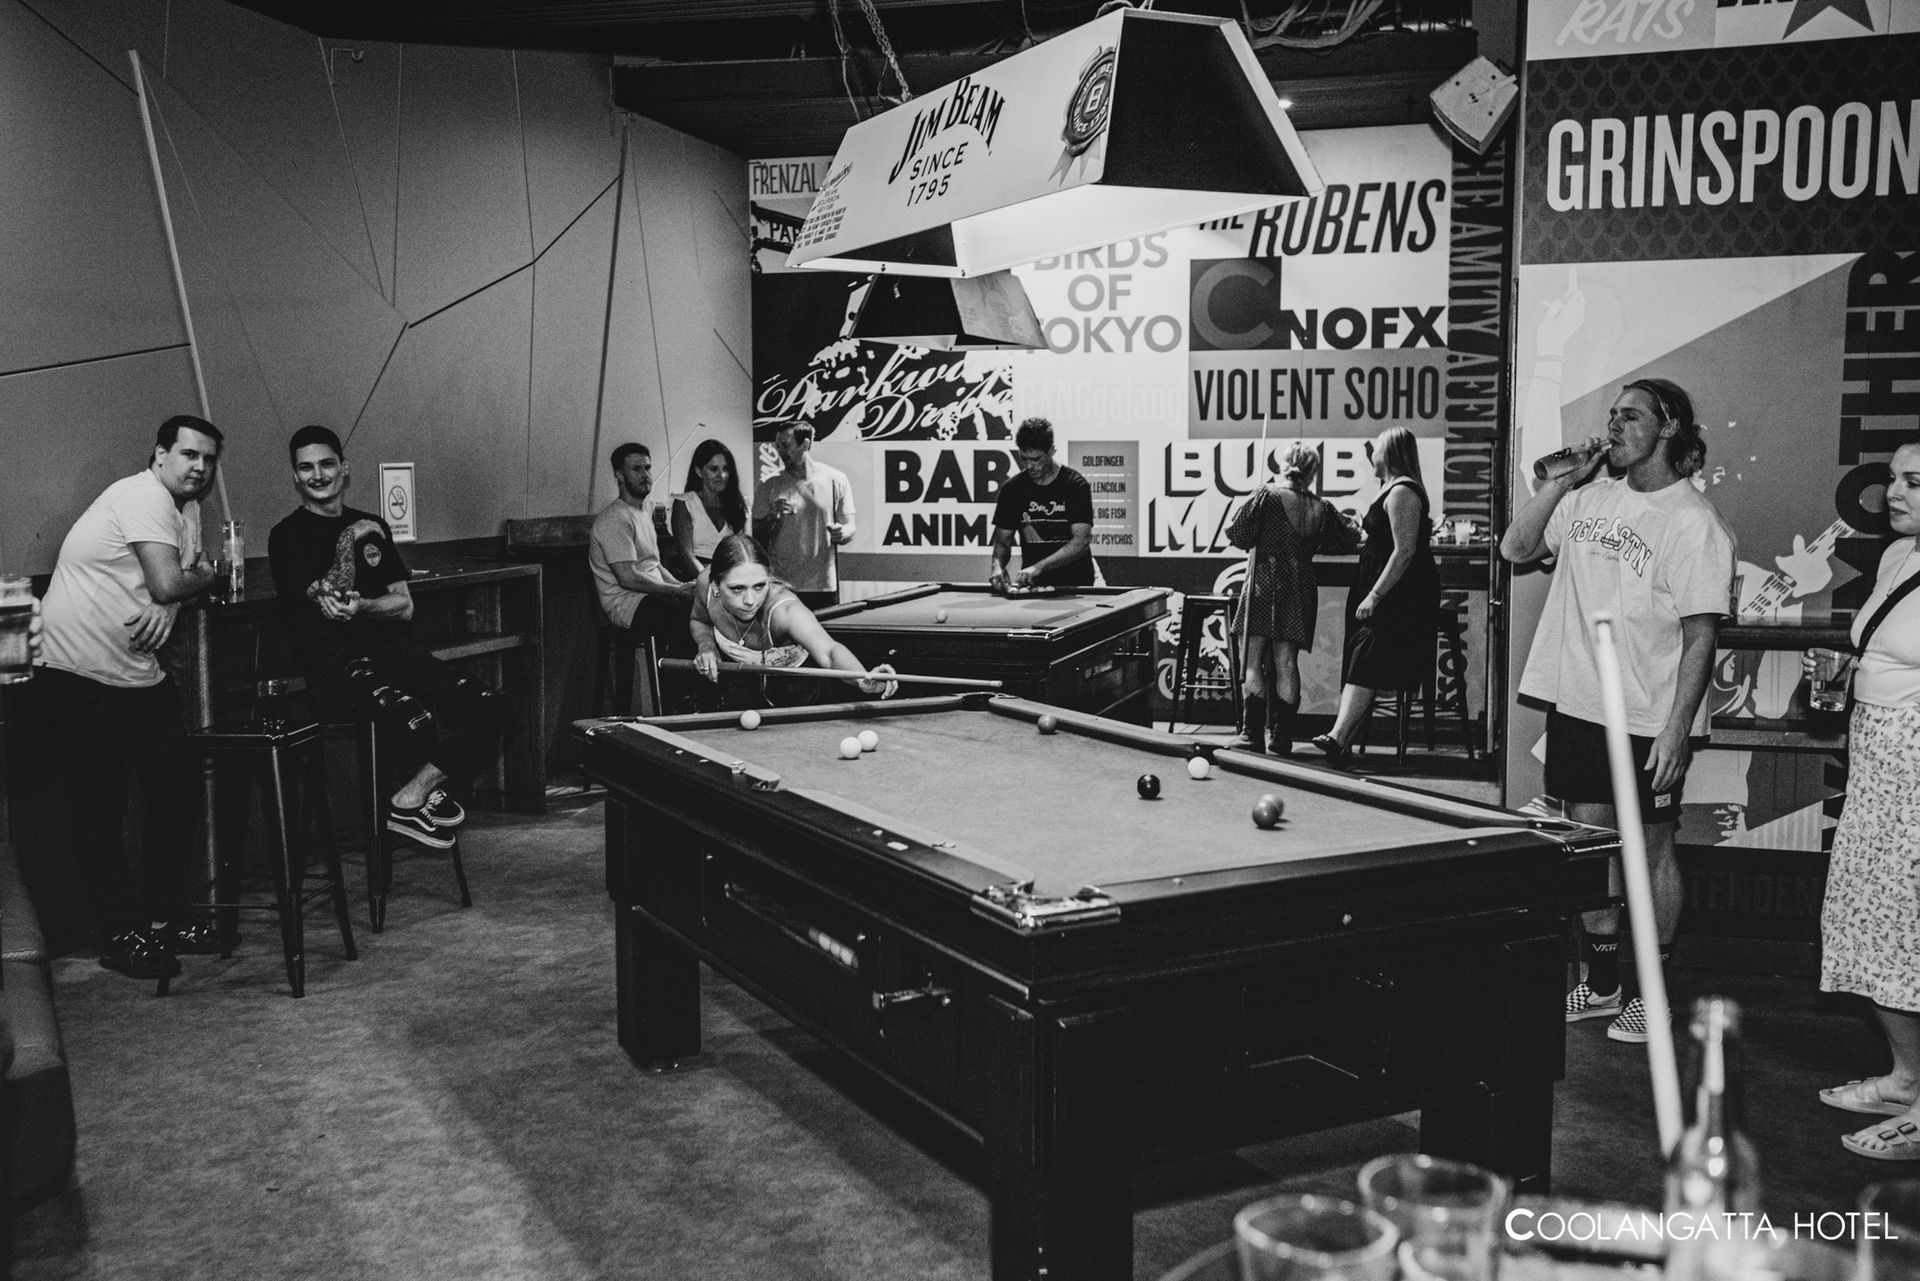 A group of people playing pool in a room with a sign that says grinspoon